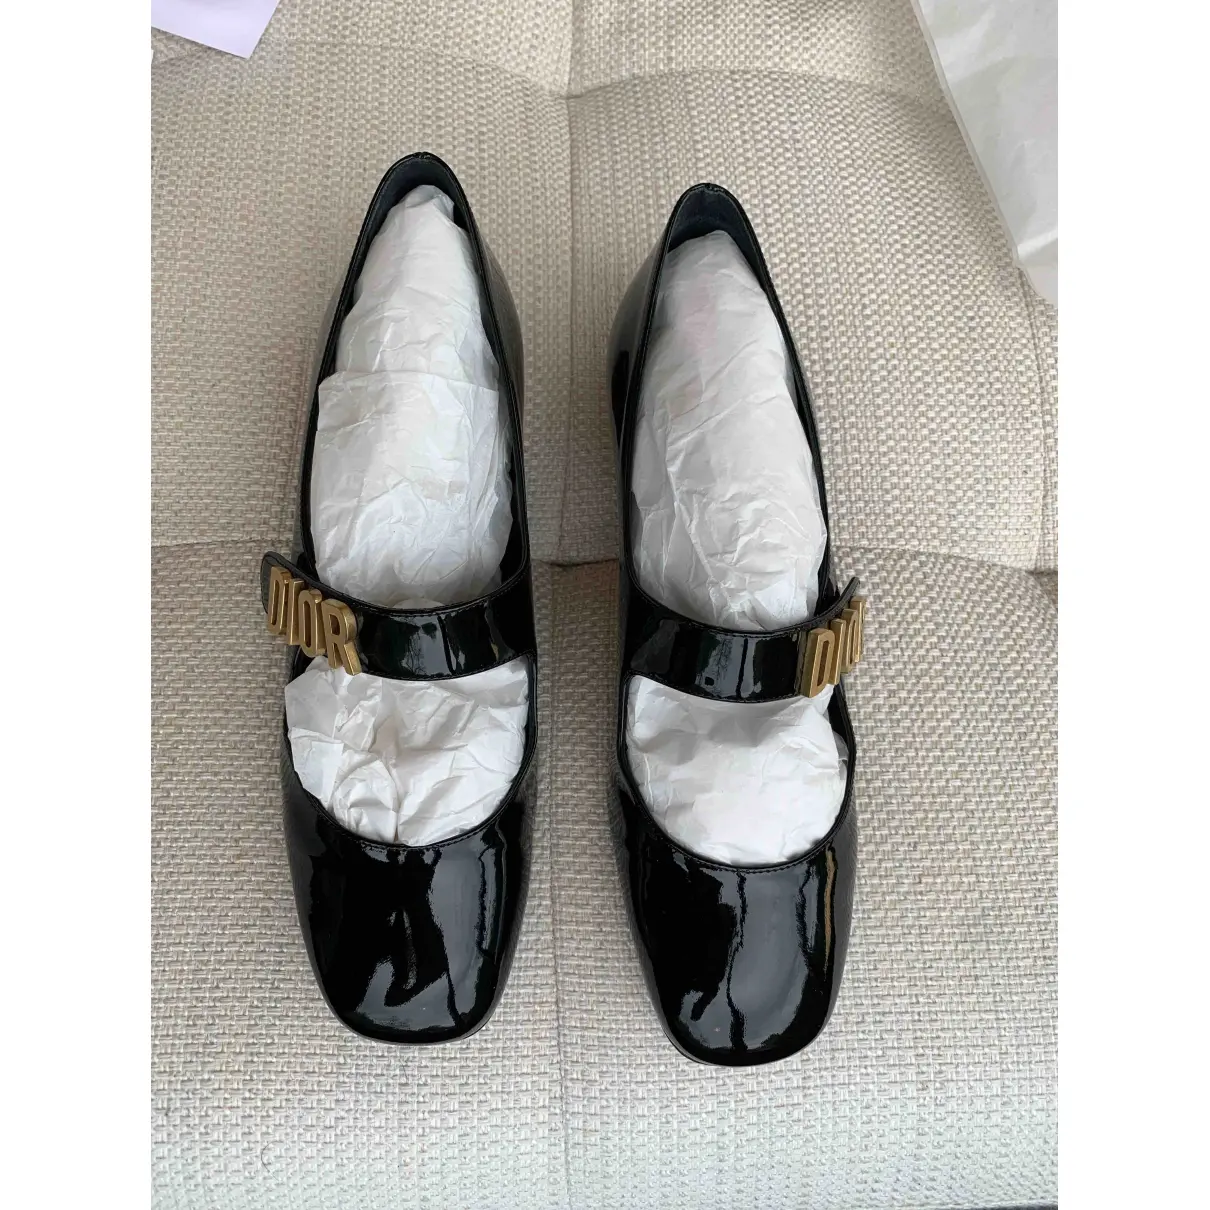 Buy Dior Baby-D patent leather ballet flats online